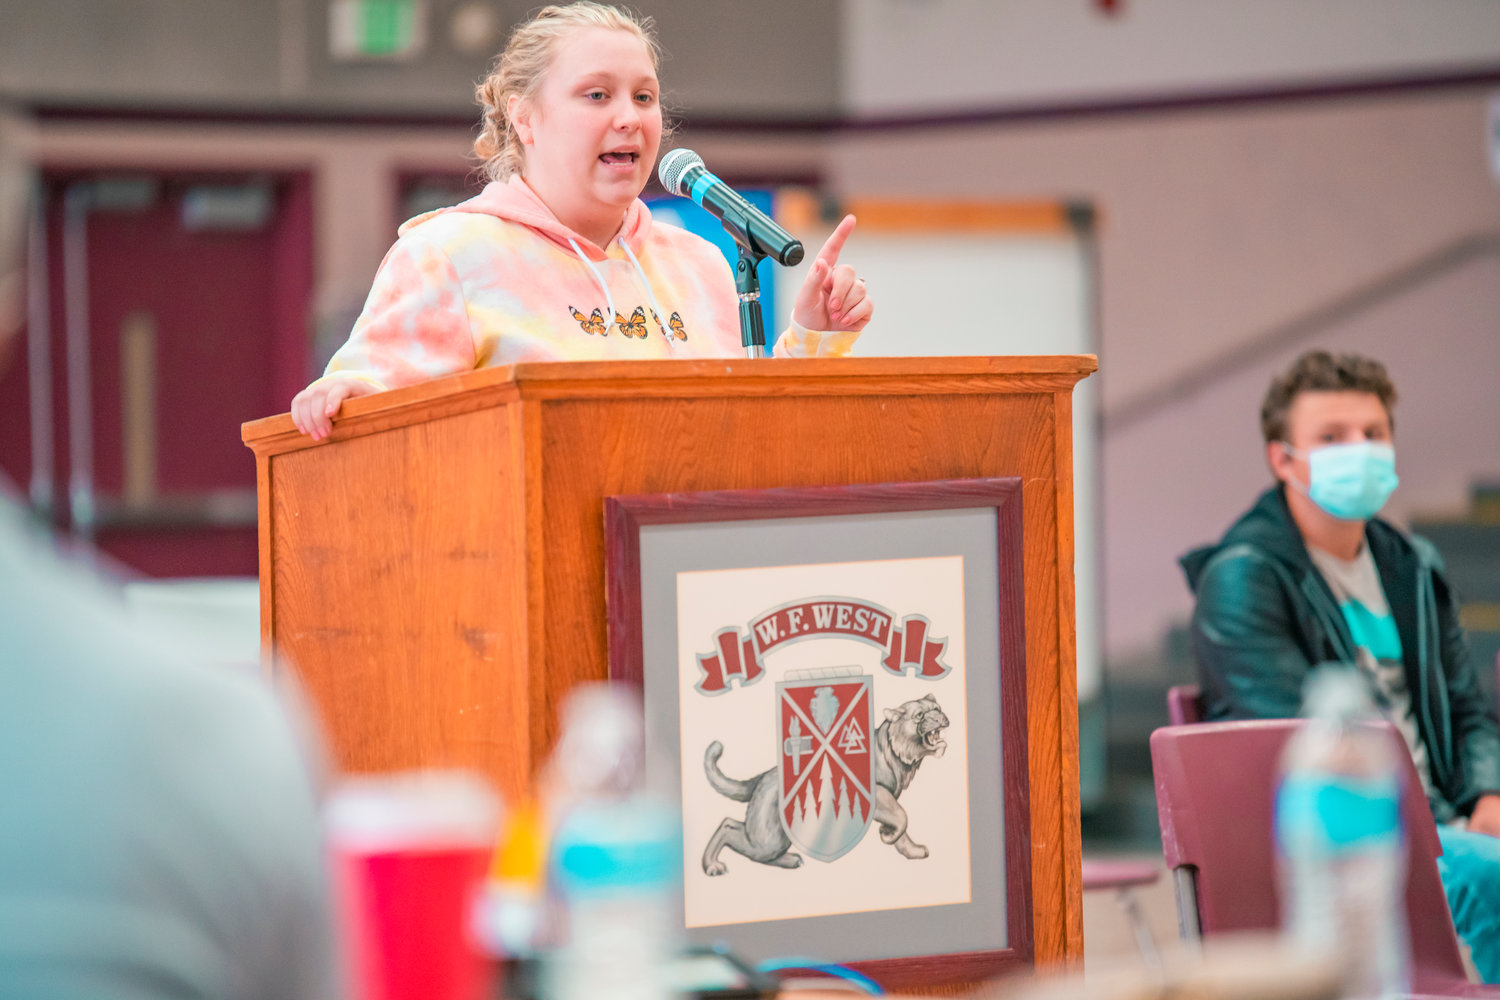 Community members speak out against Board Policy 3211 during a Chehalis School Board meeting Tuesday in Chehalis.